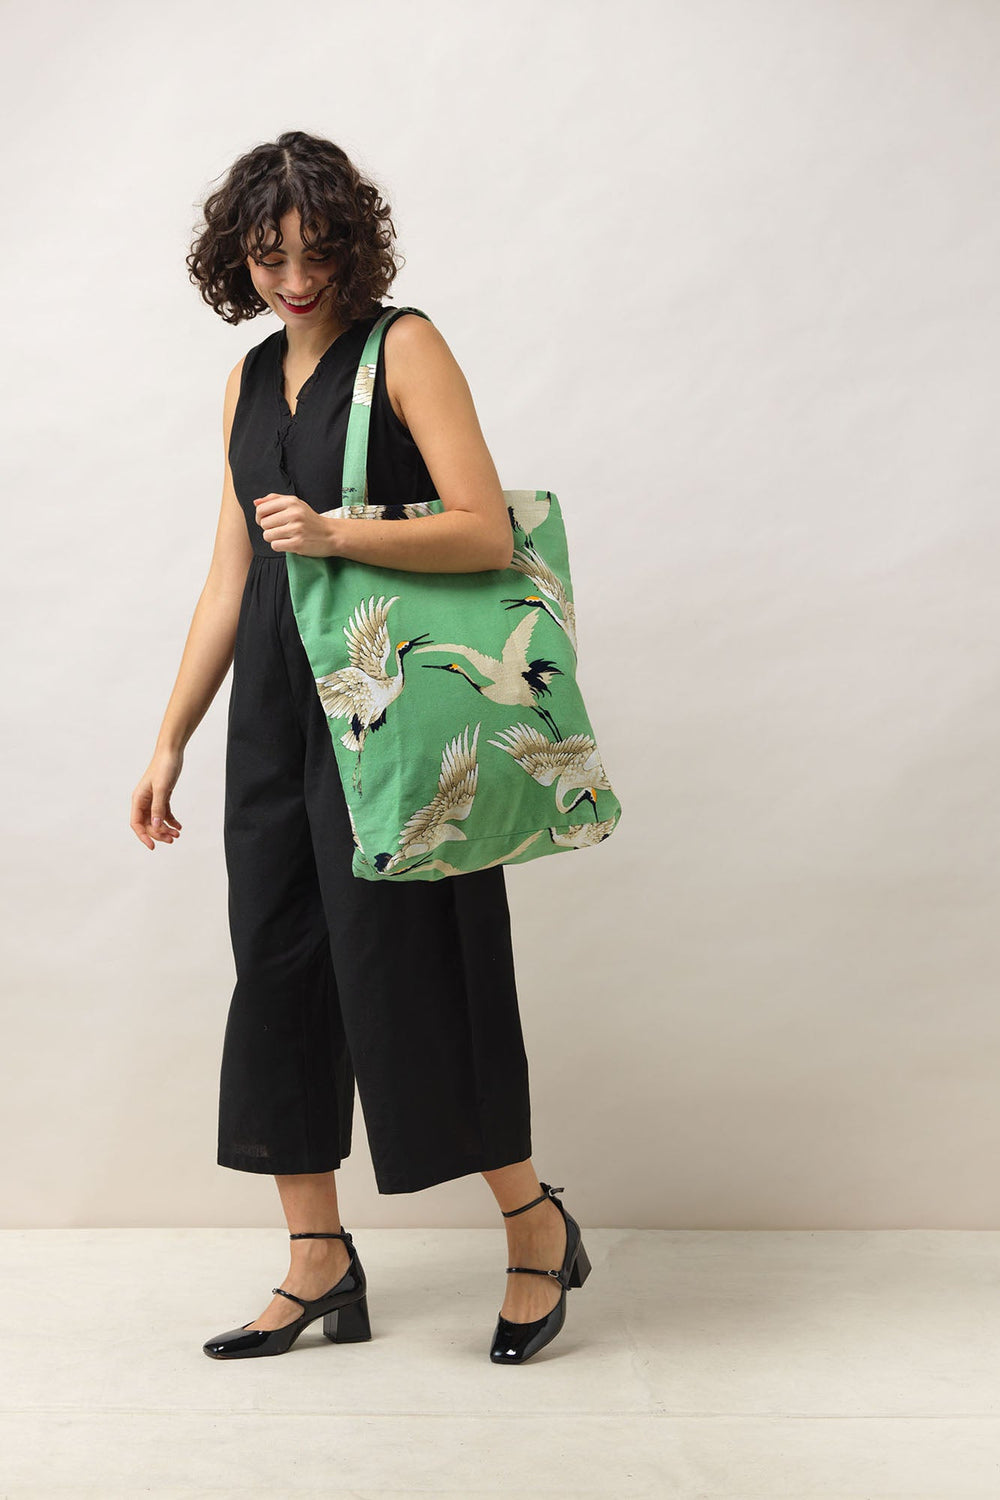 Women's accessories, gifts for her. Canvas tote bag sustainable shopping bag or beach bag in pea green and white stork print by One Hundred Stars